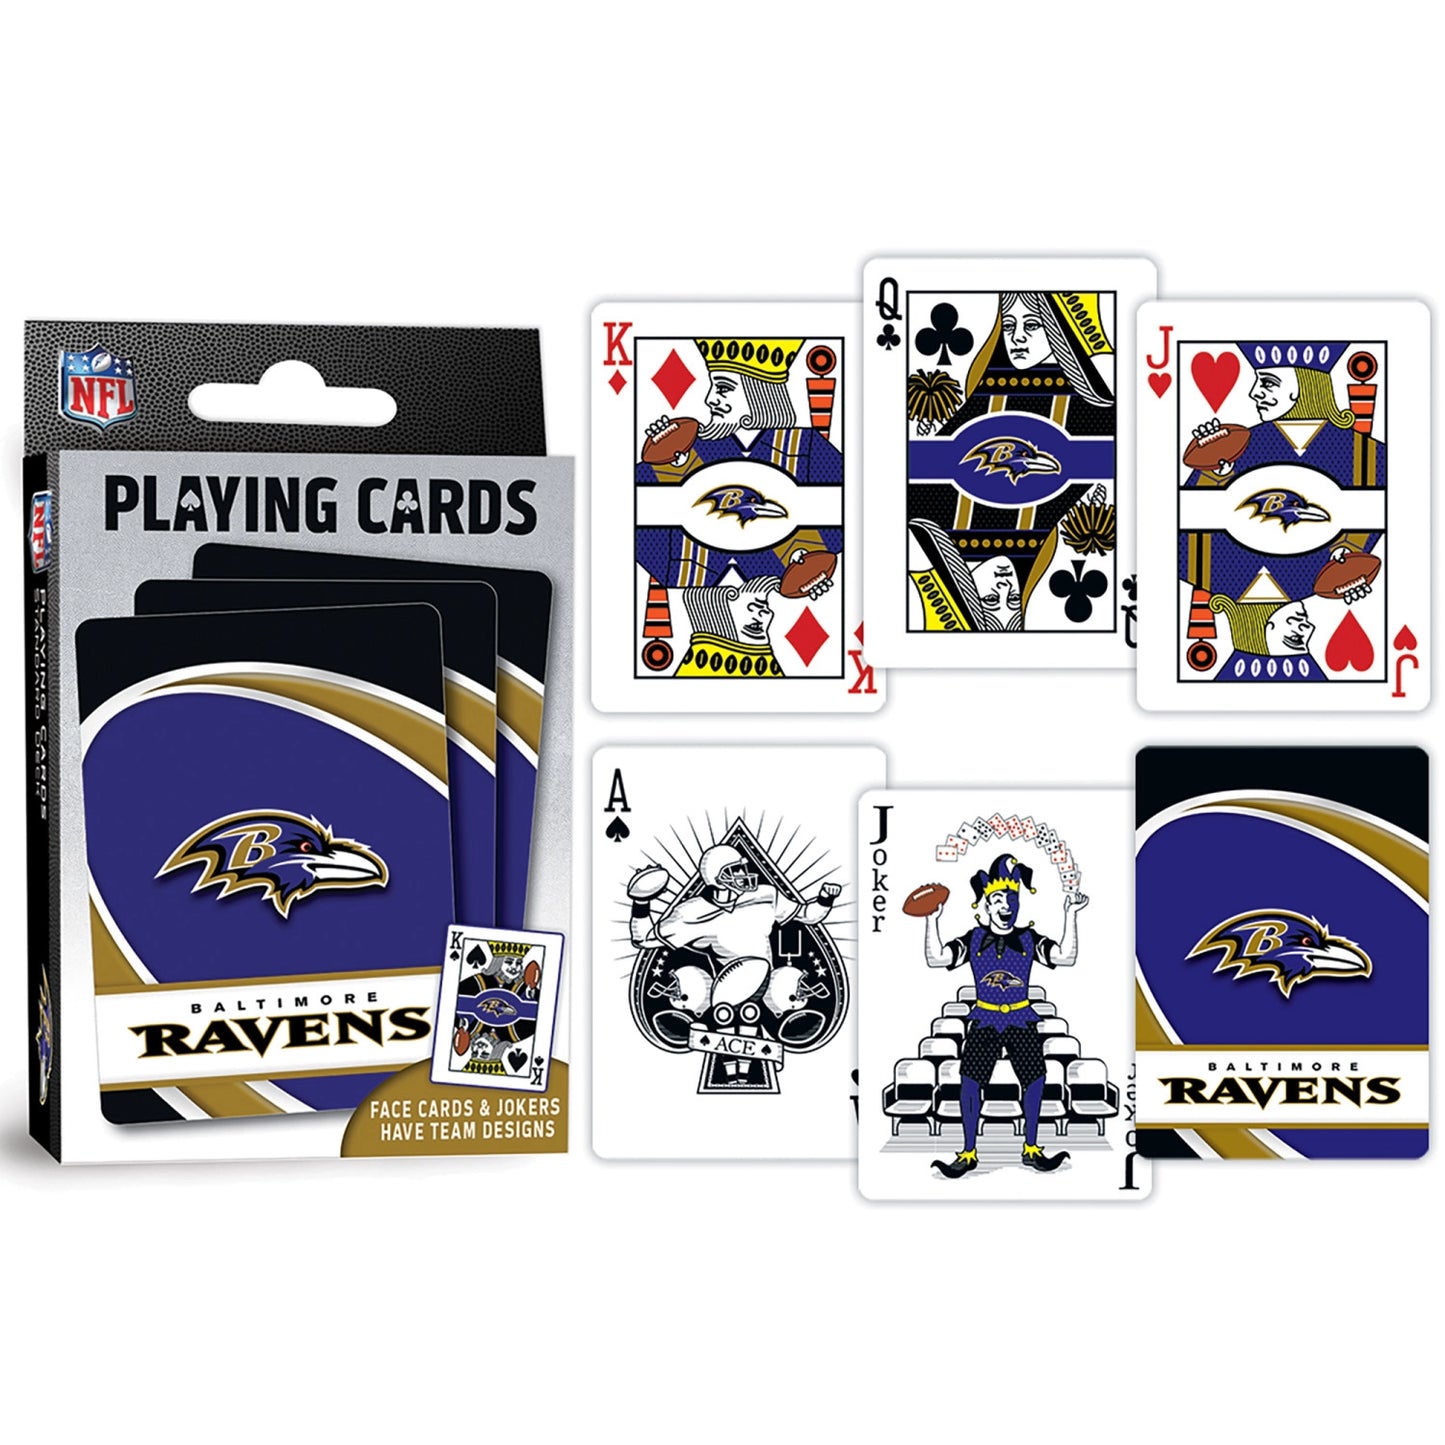 Baltimore Ravens Playing Cards – Ca-Caw!